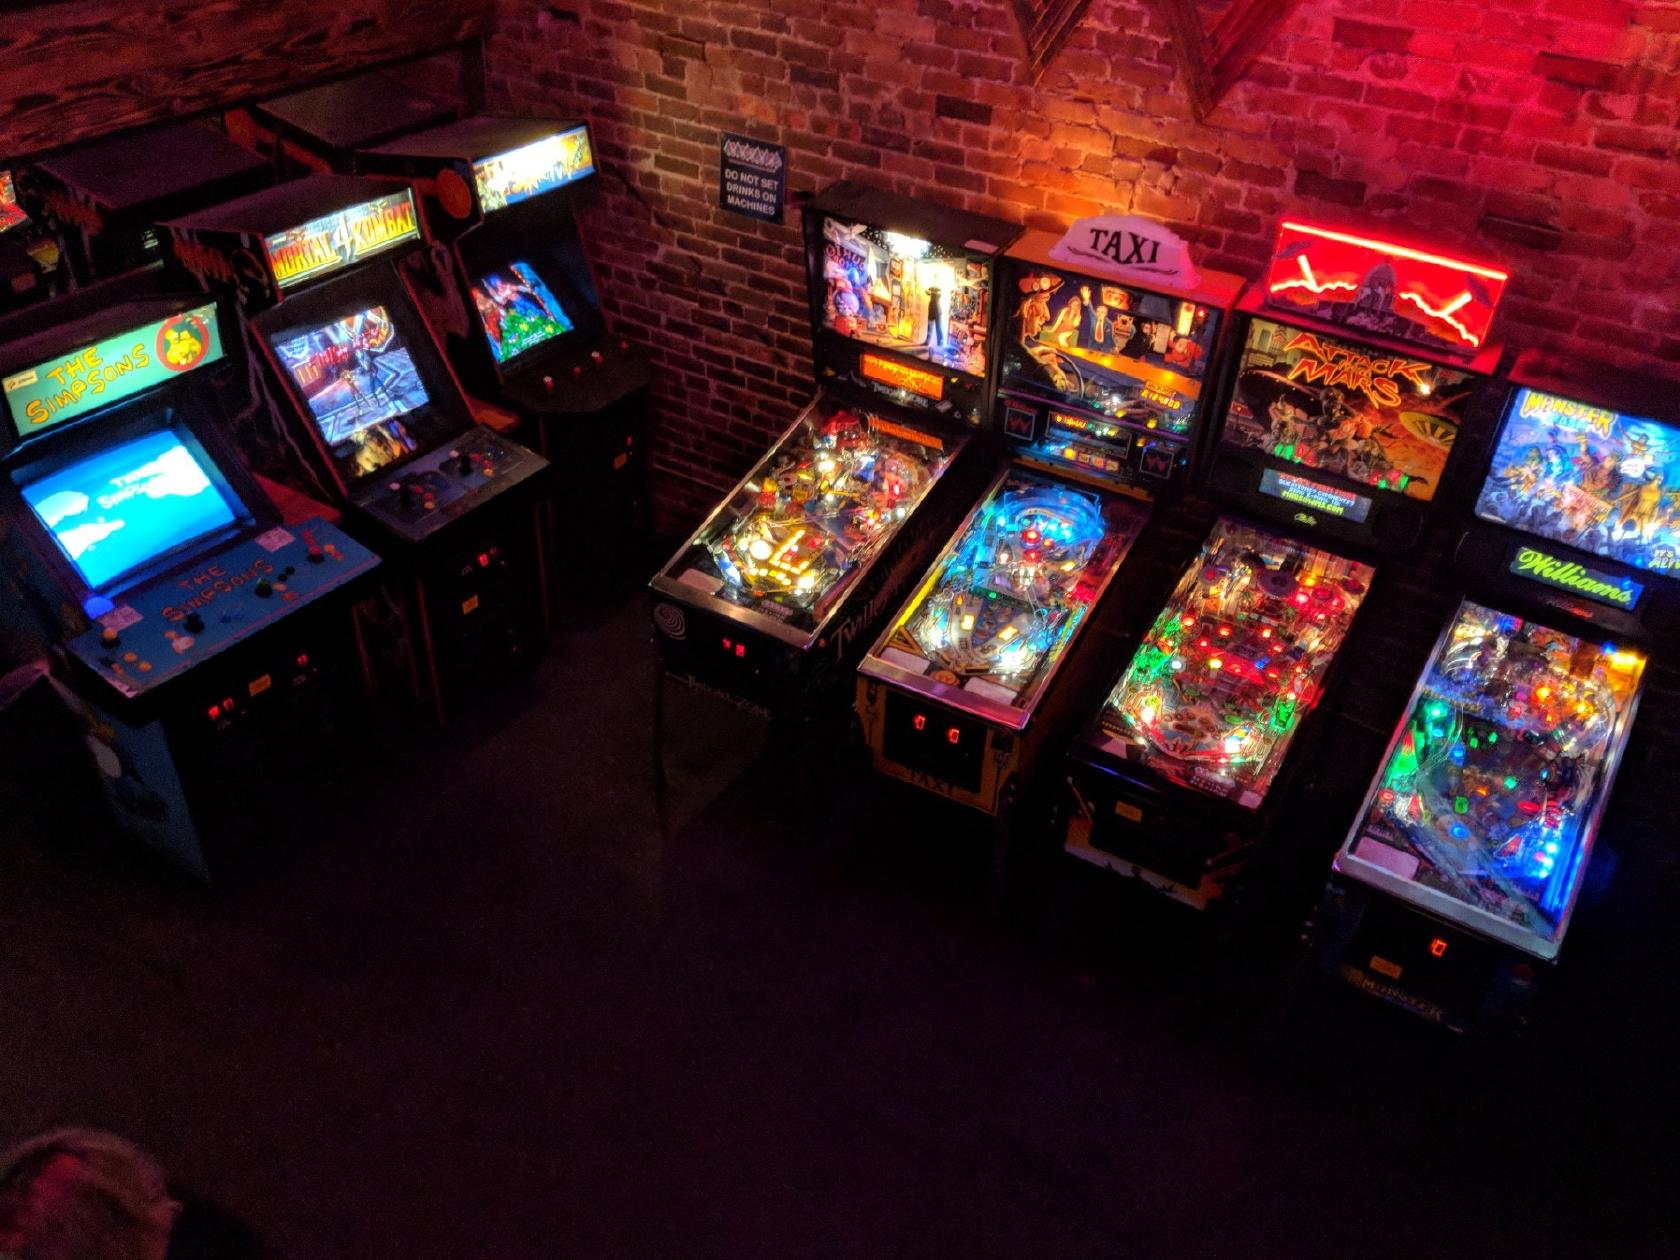 seven retro gaming machines like mortal kombat line the wall of arcade bar, or barcade, in gainesville florida